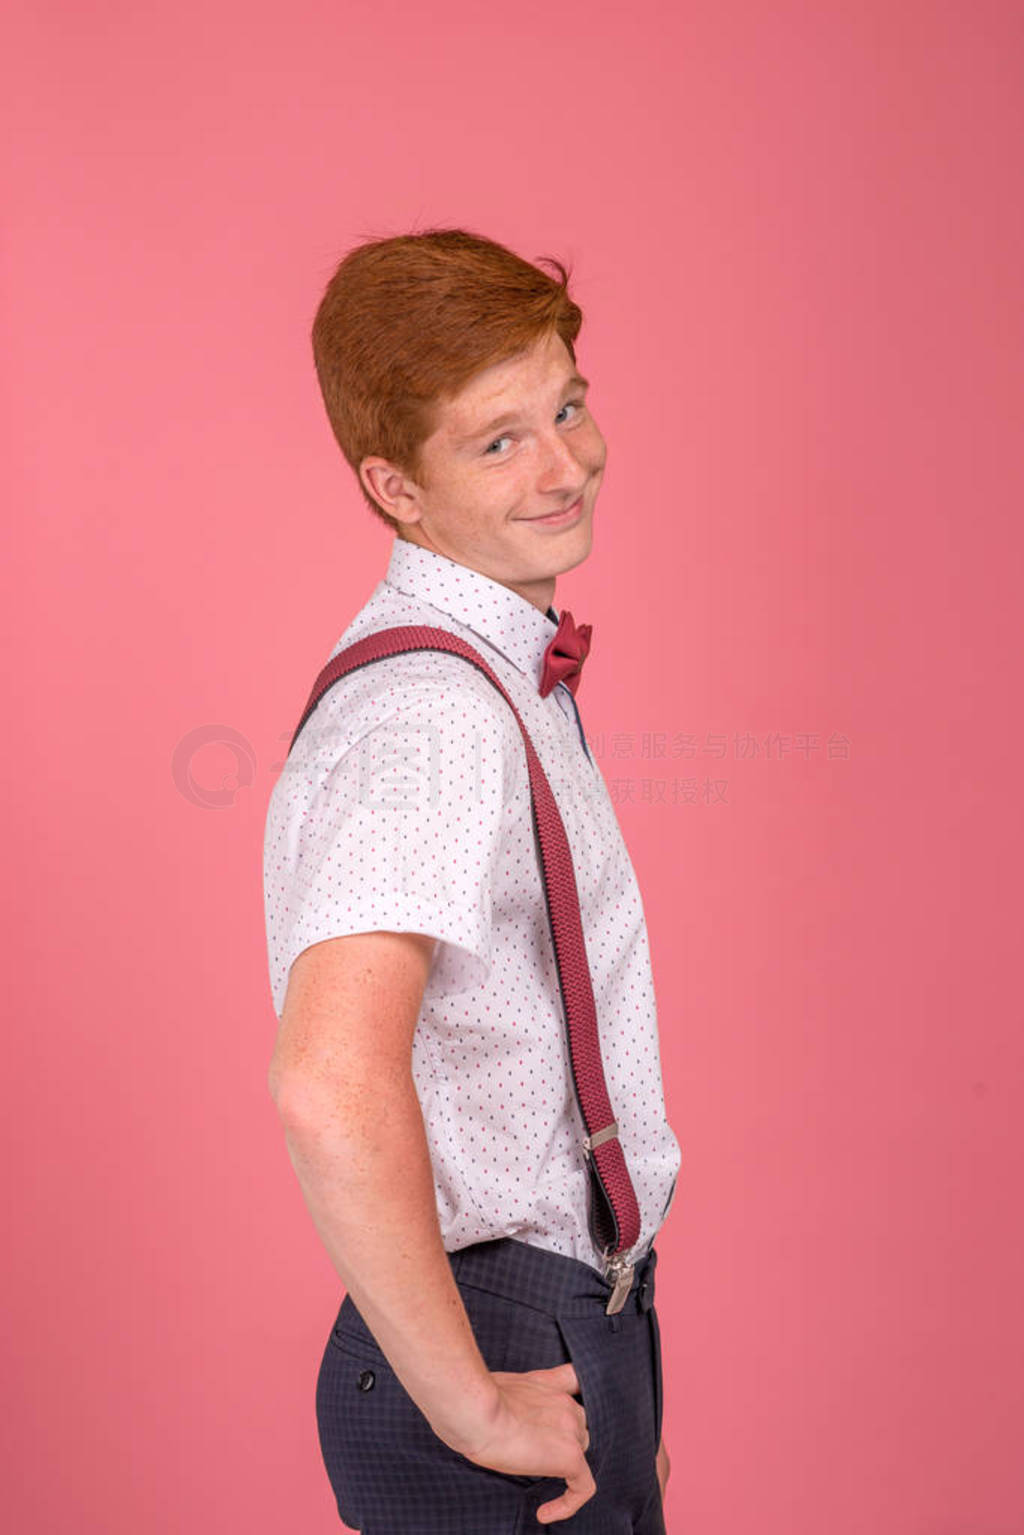 Studio shirt of a stylish red-haired young smiling redhair man